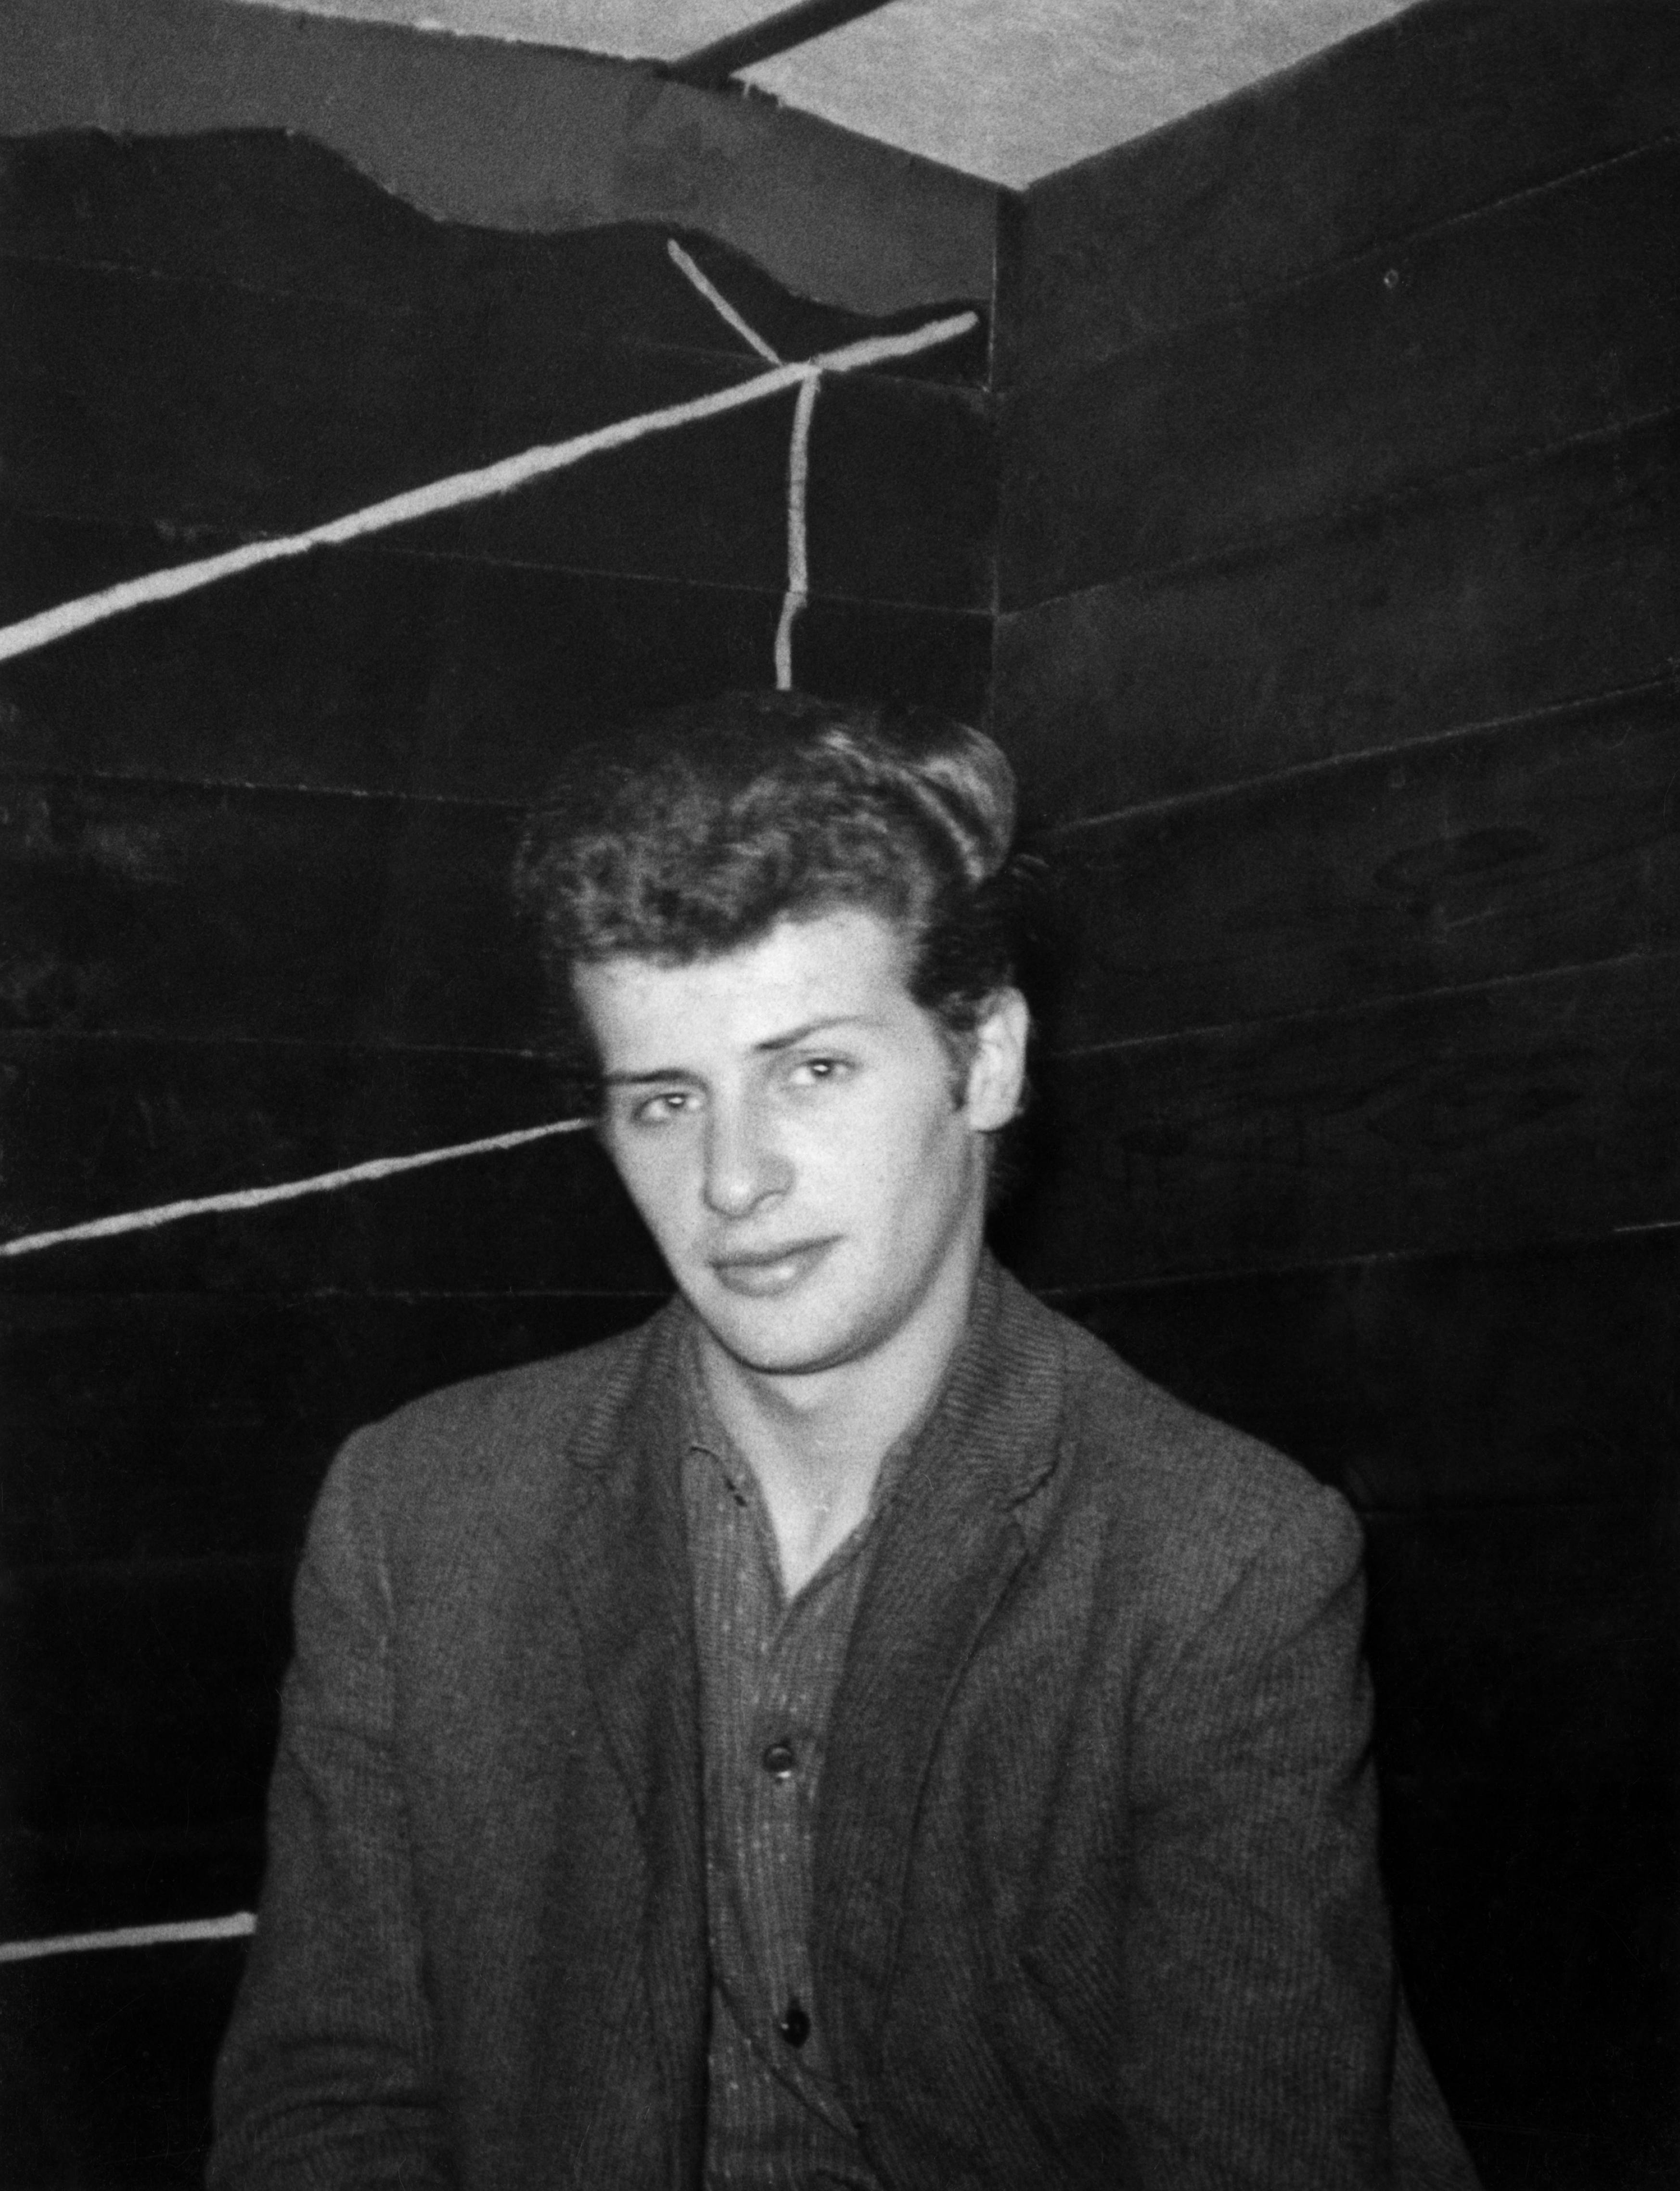 Pete Best in 1962 poses for a photo in Liverpool's Cavern Club